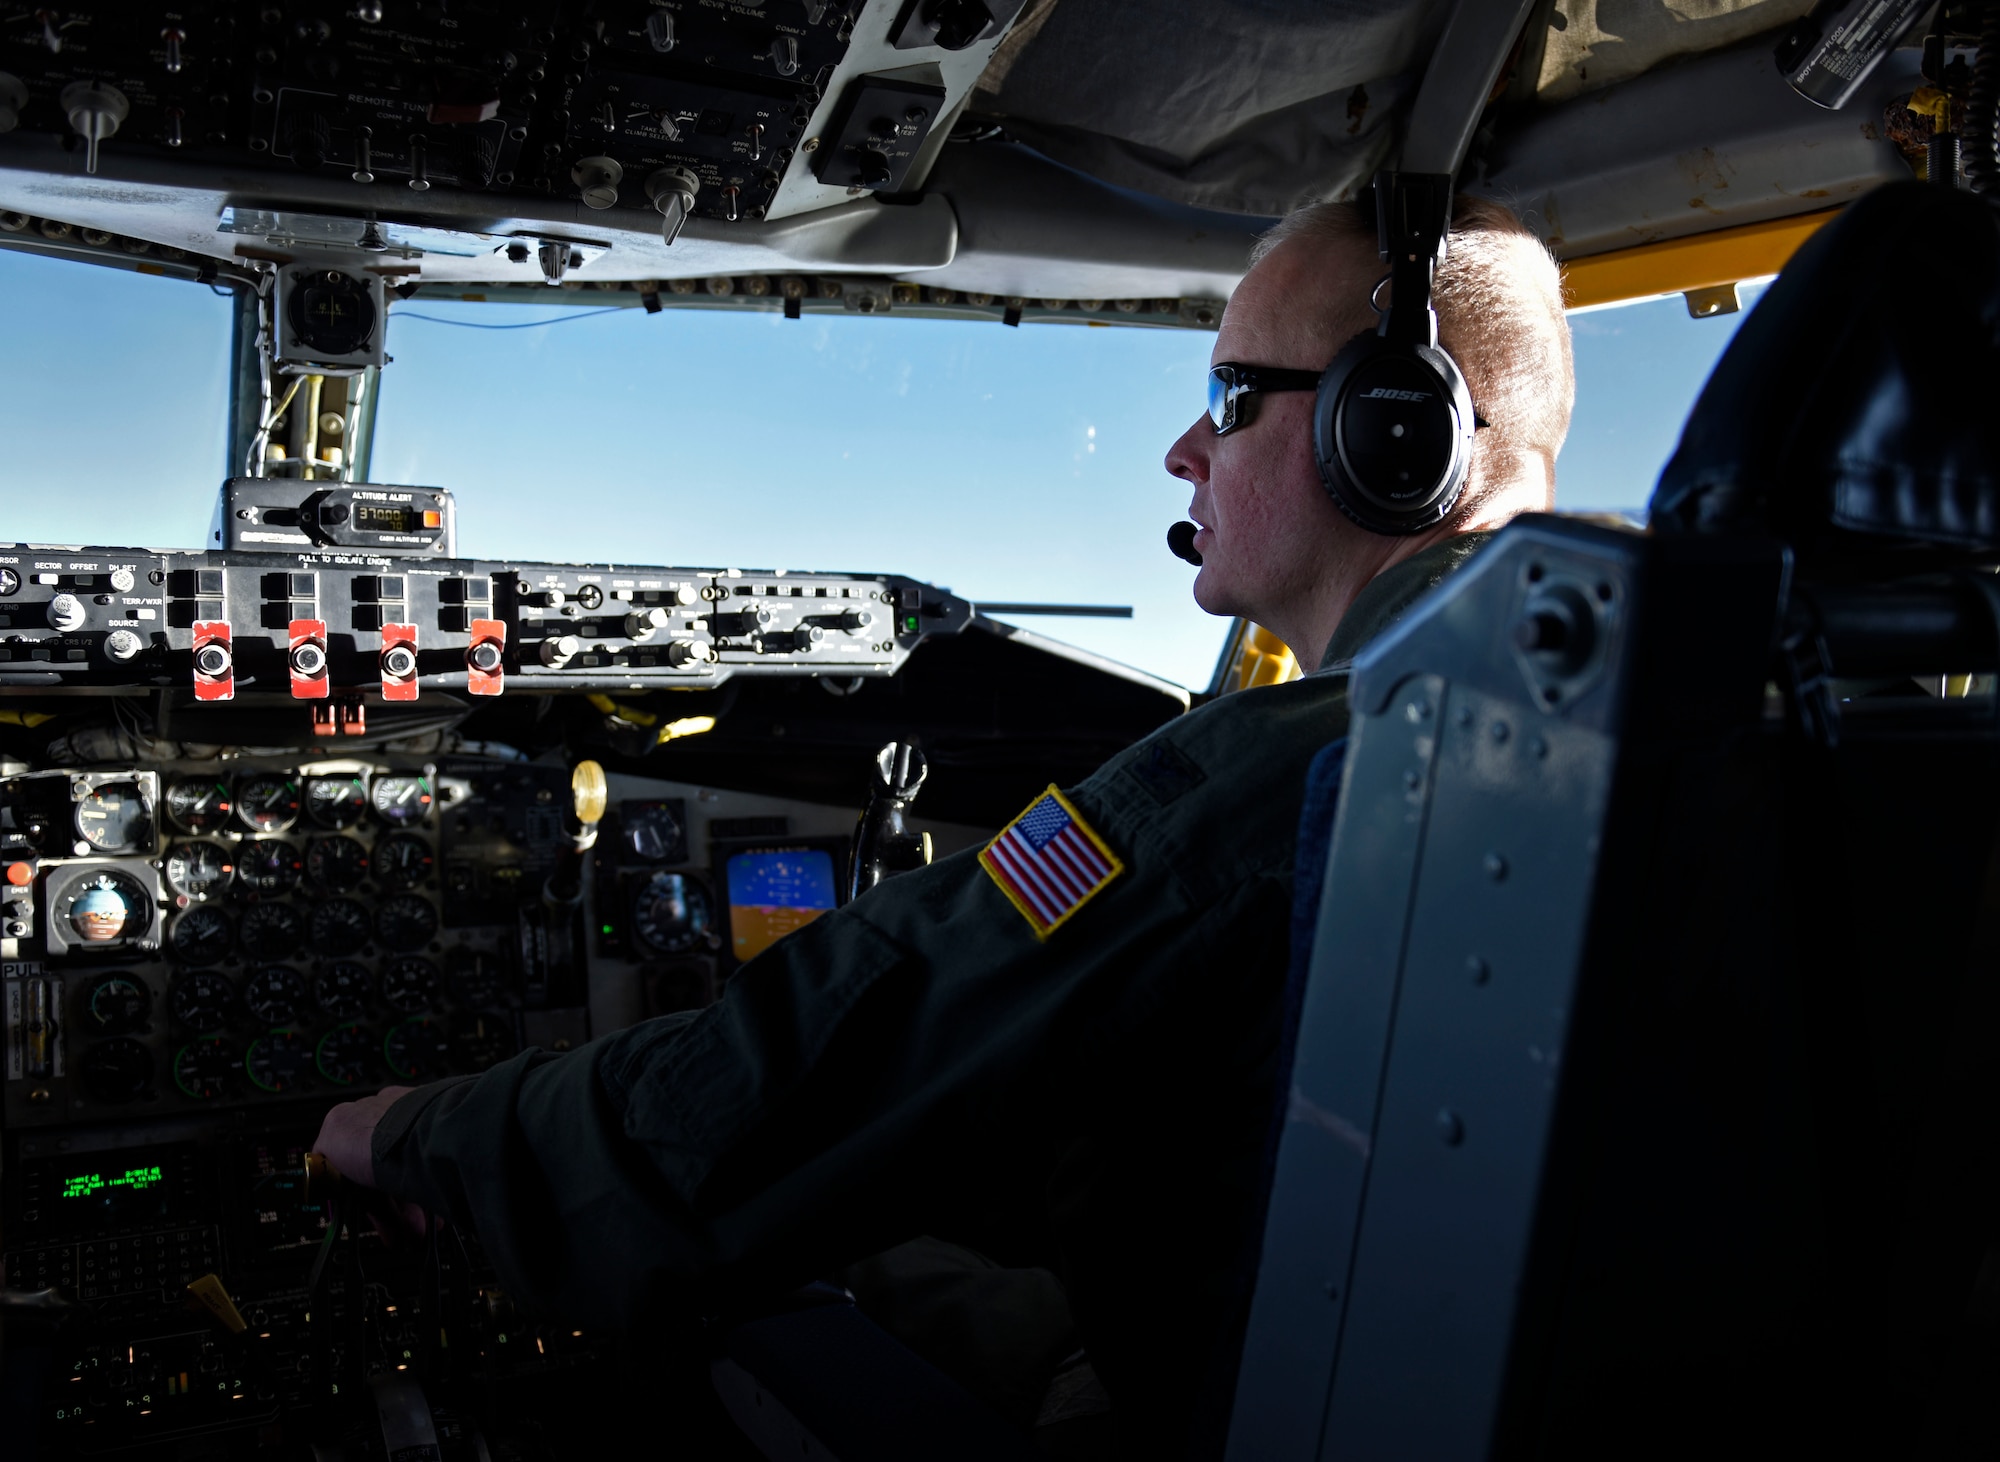 Col. Derek Salmi, 92nd Air Refueling Wing commander, pilots a KC-135 Stratotanker in-route to Tinker Air Force Base, Oklahoma, Nov. 18, 2018. Tinker AFB is made up of 5,500 acres with 460 buildings hosting operational missions for the Air Force, Navy as well as several Department of Defense agencies. (U.S. Air Force photo by Airman 1st Class Jesenia Landaverde)